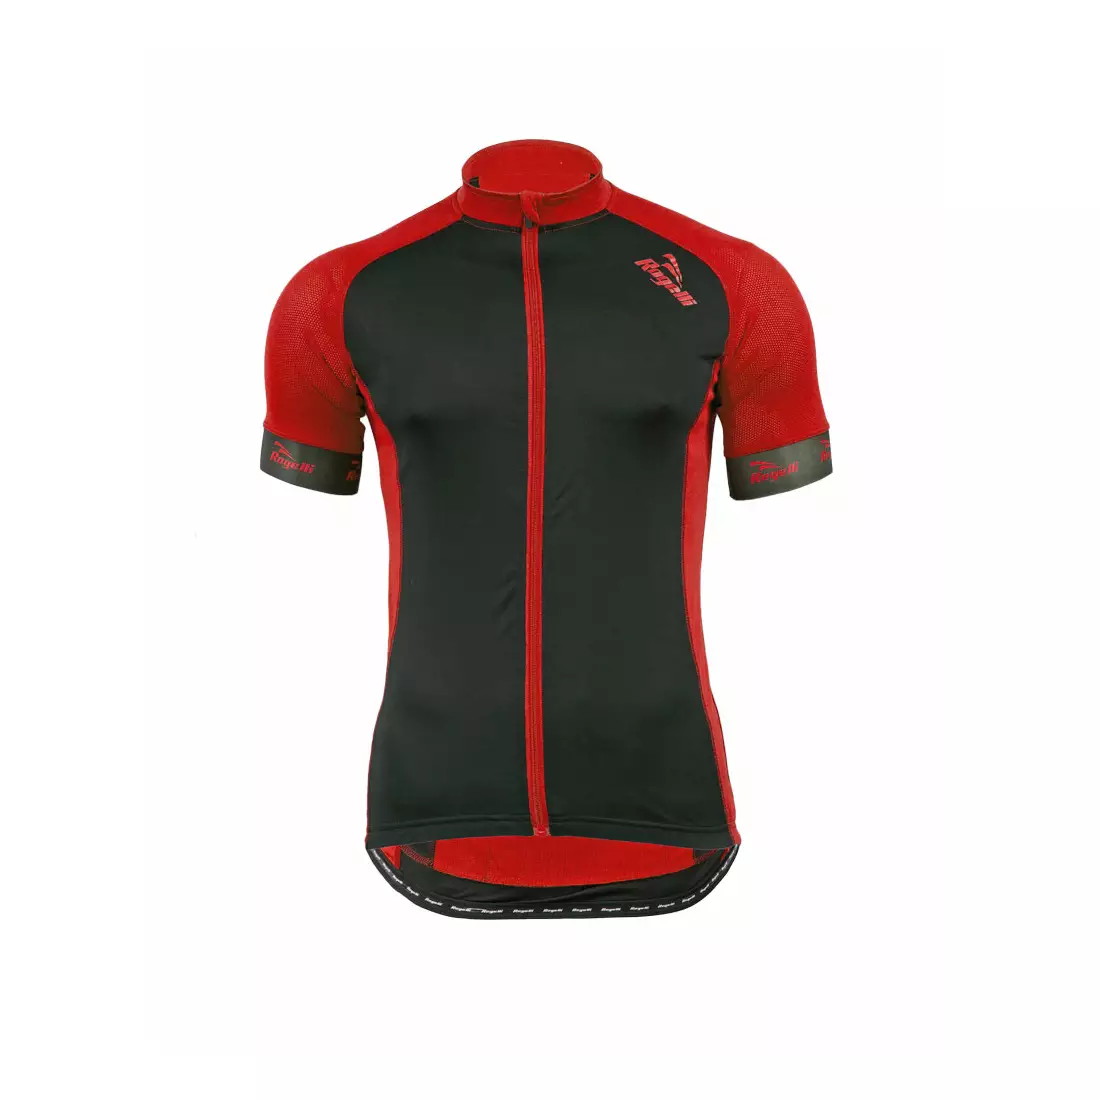 ROGELLI PRALI - men's cycling jersey, color: black and red